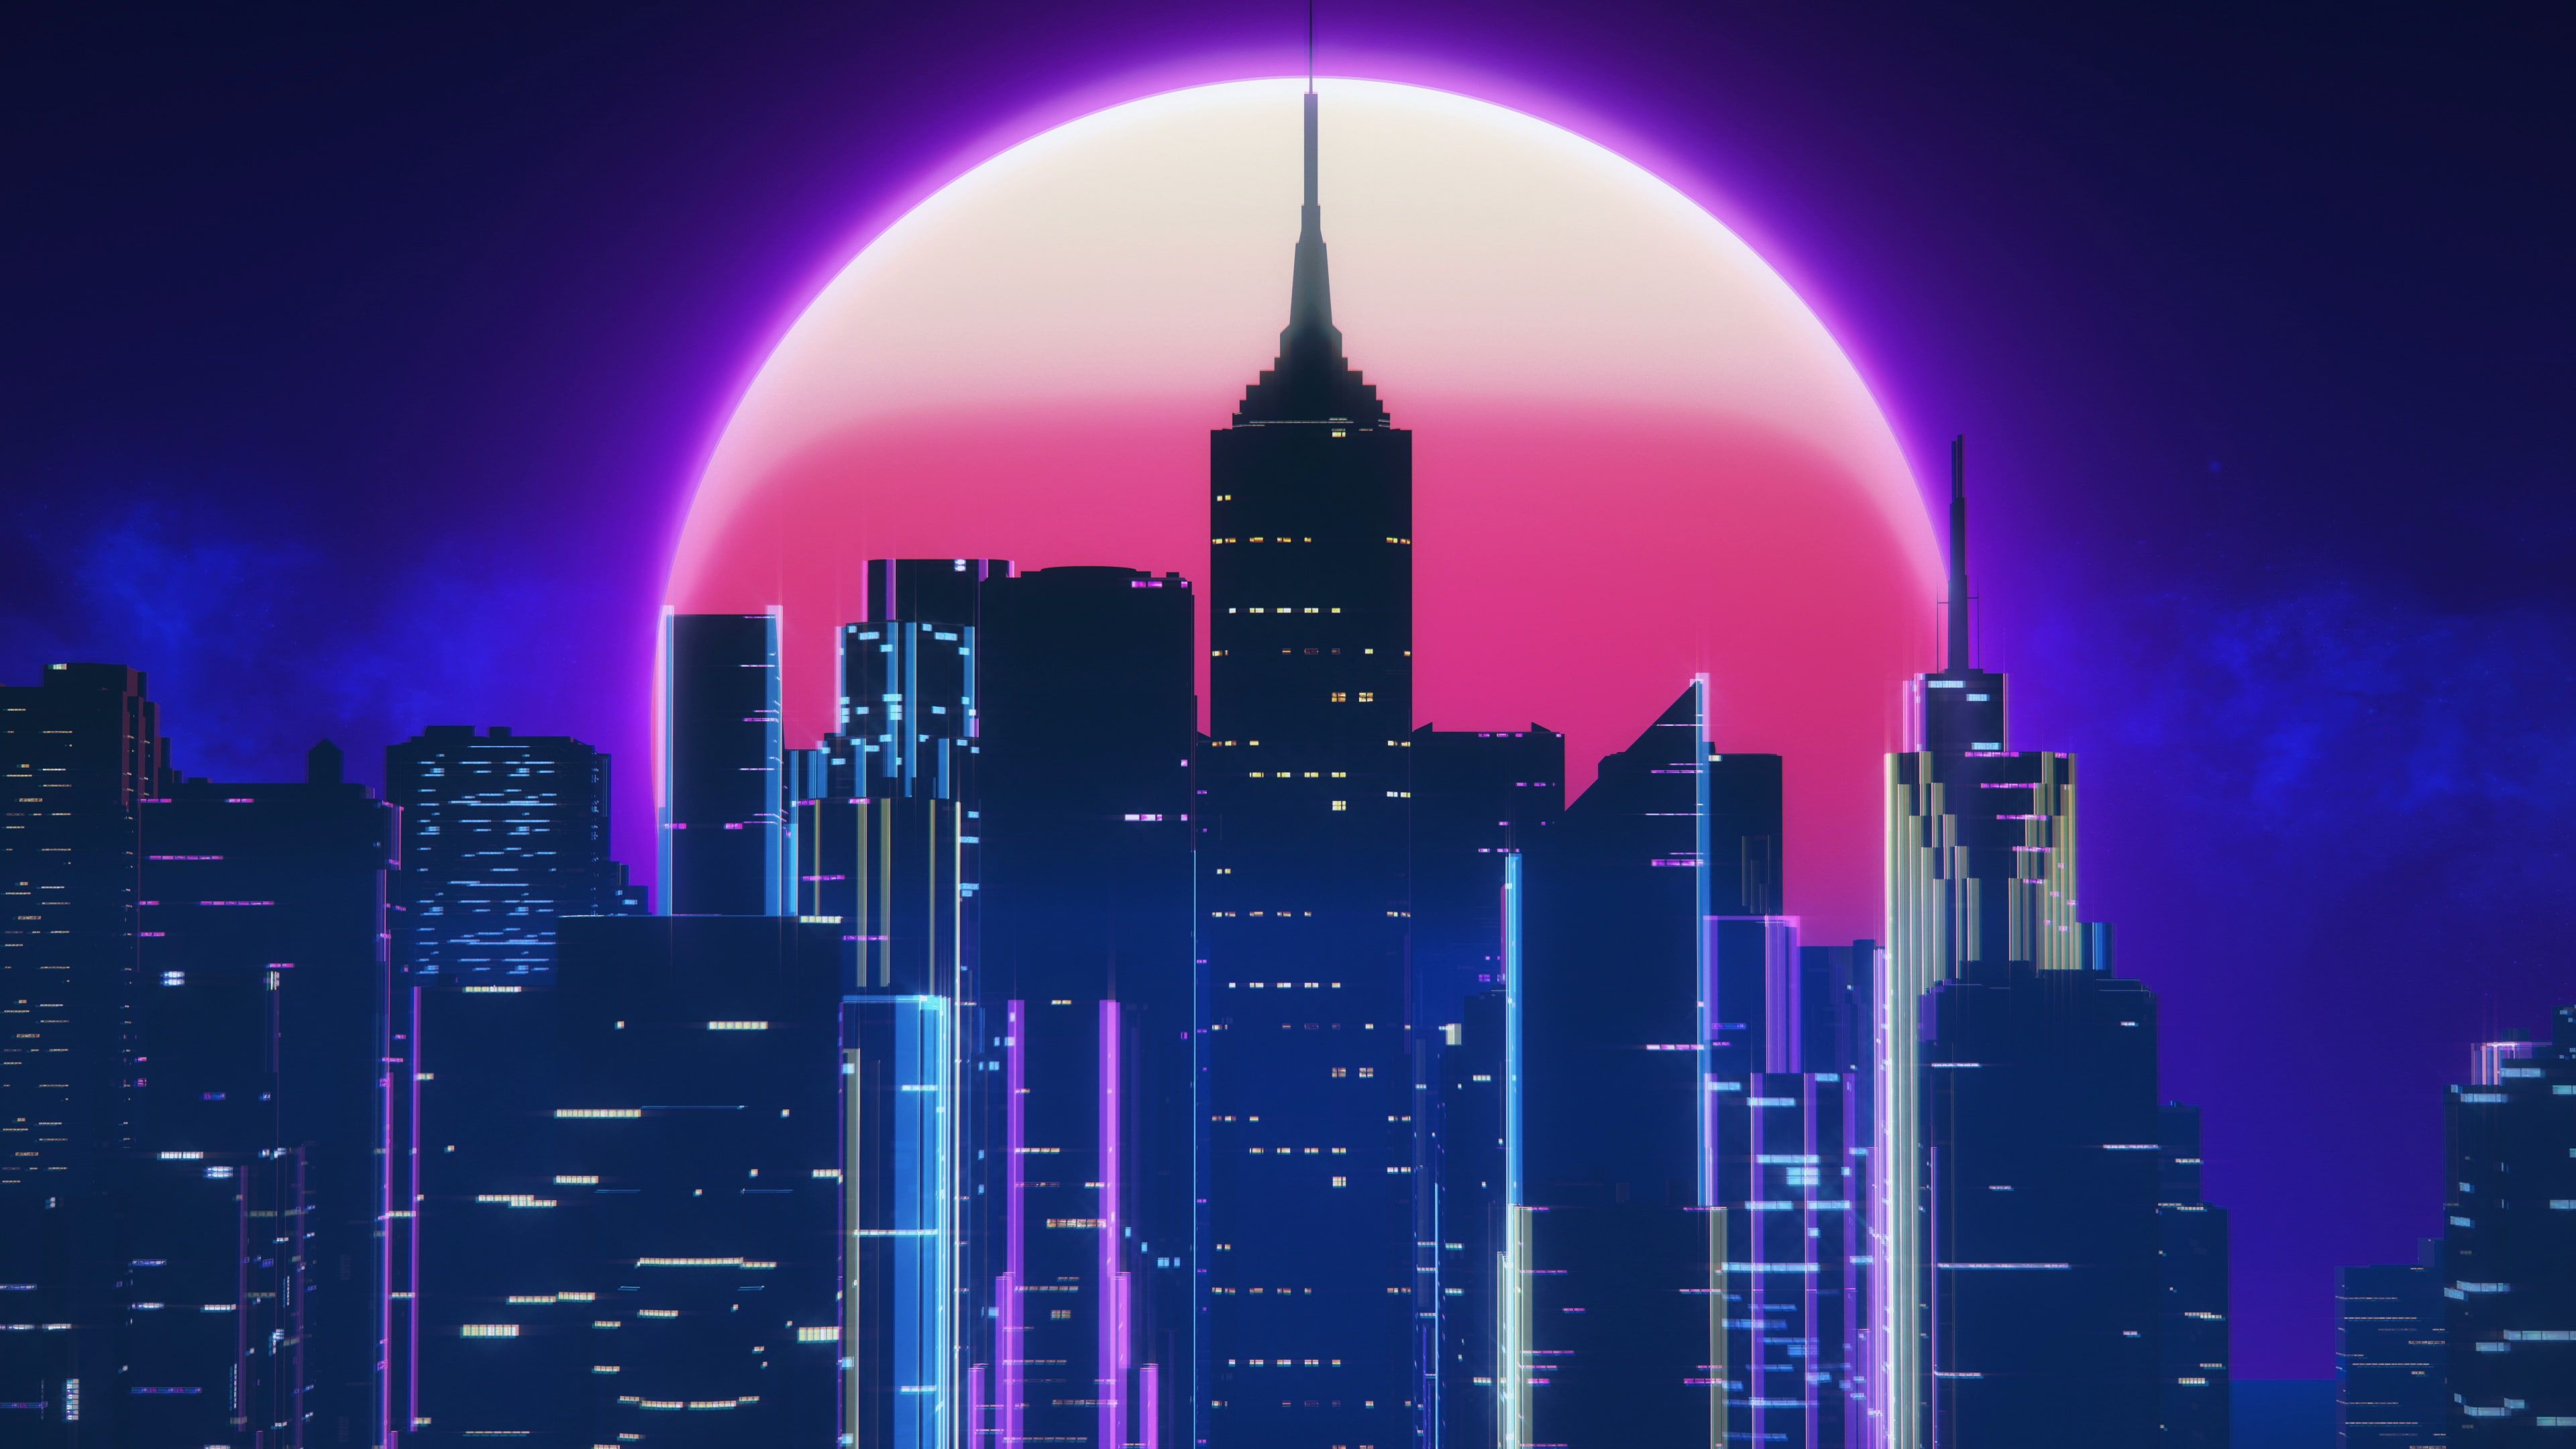 Night #Music The city The moon #Style #Neon 's #Synth #Retrowave #Synthwave New Retro Wave #Futuresynth #Sinta. City wallpaper, Vaporwave wallpaper, Synthwave